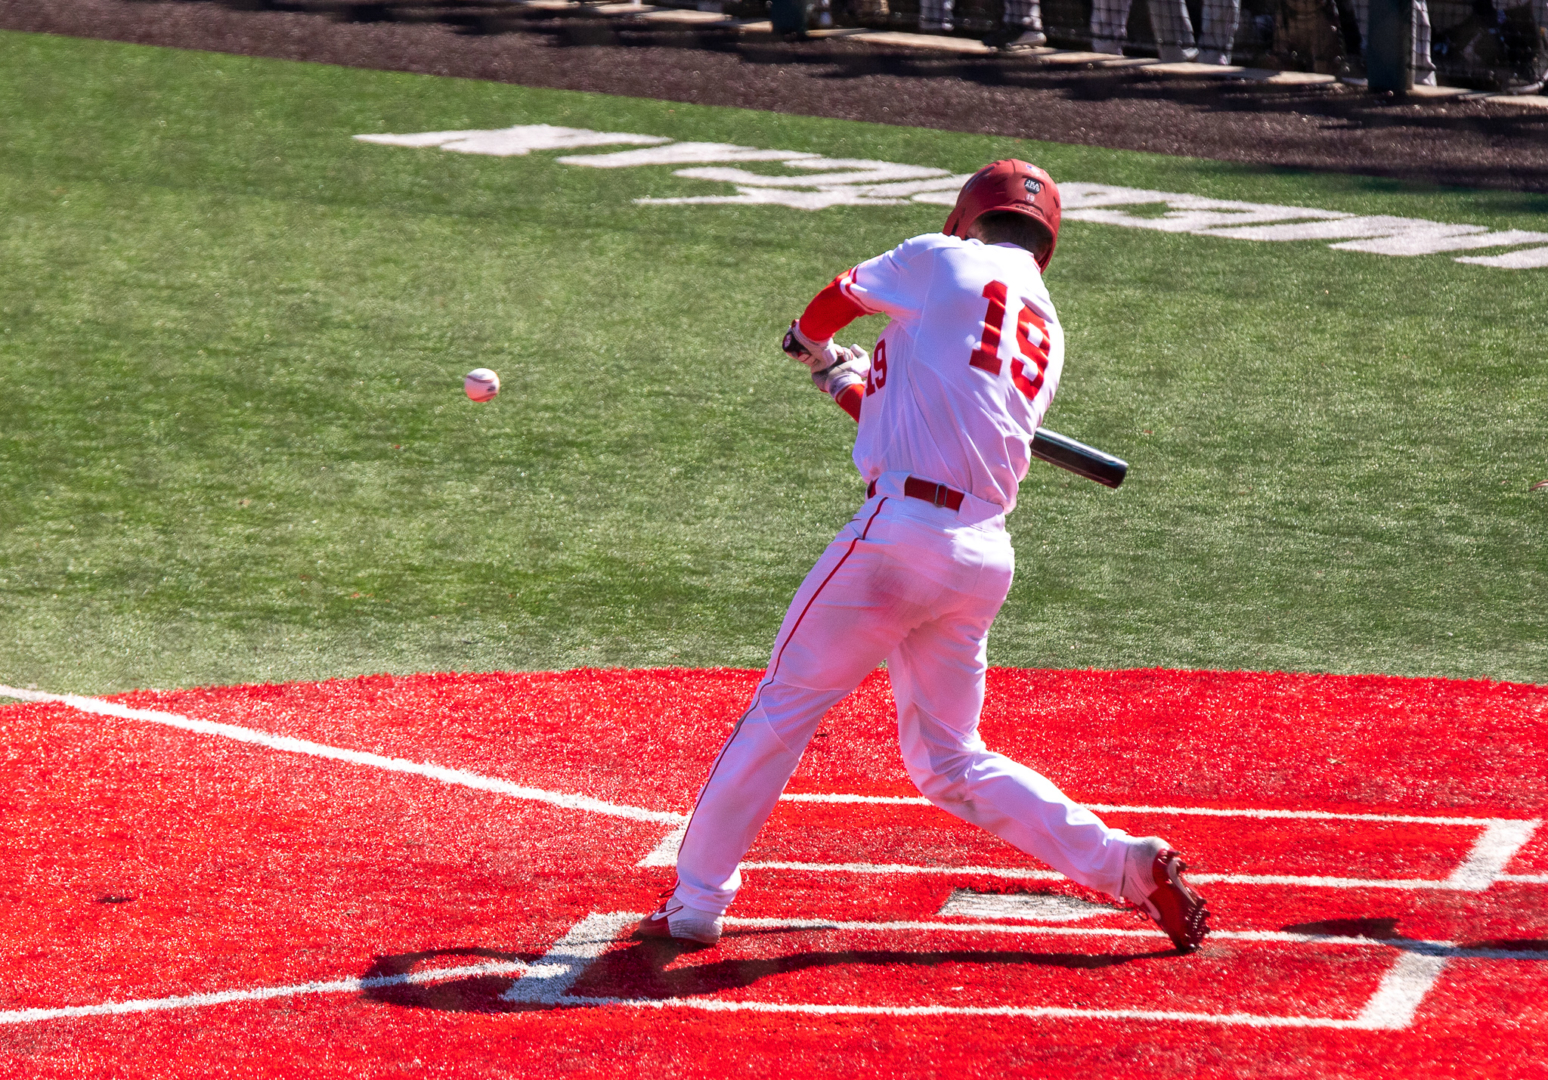 Freshman third baseman Will Pendergrass hit his first two career collegiate homers in UH baseball's victory Saturday | Andy Yanez/The Cougar